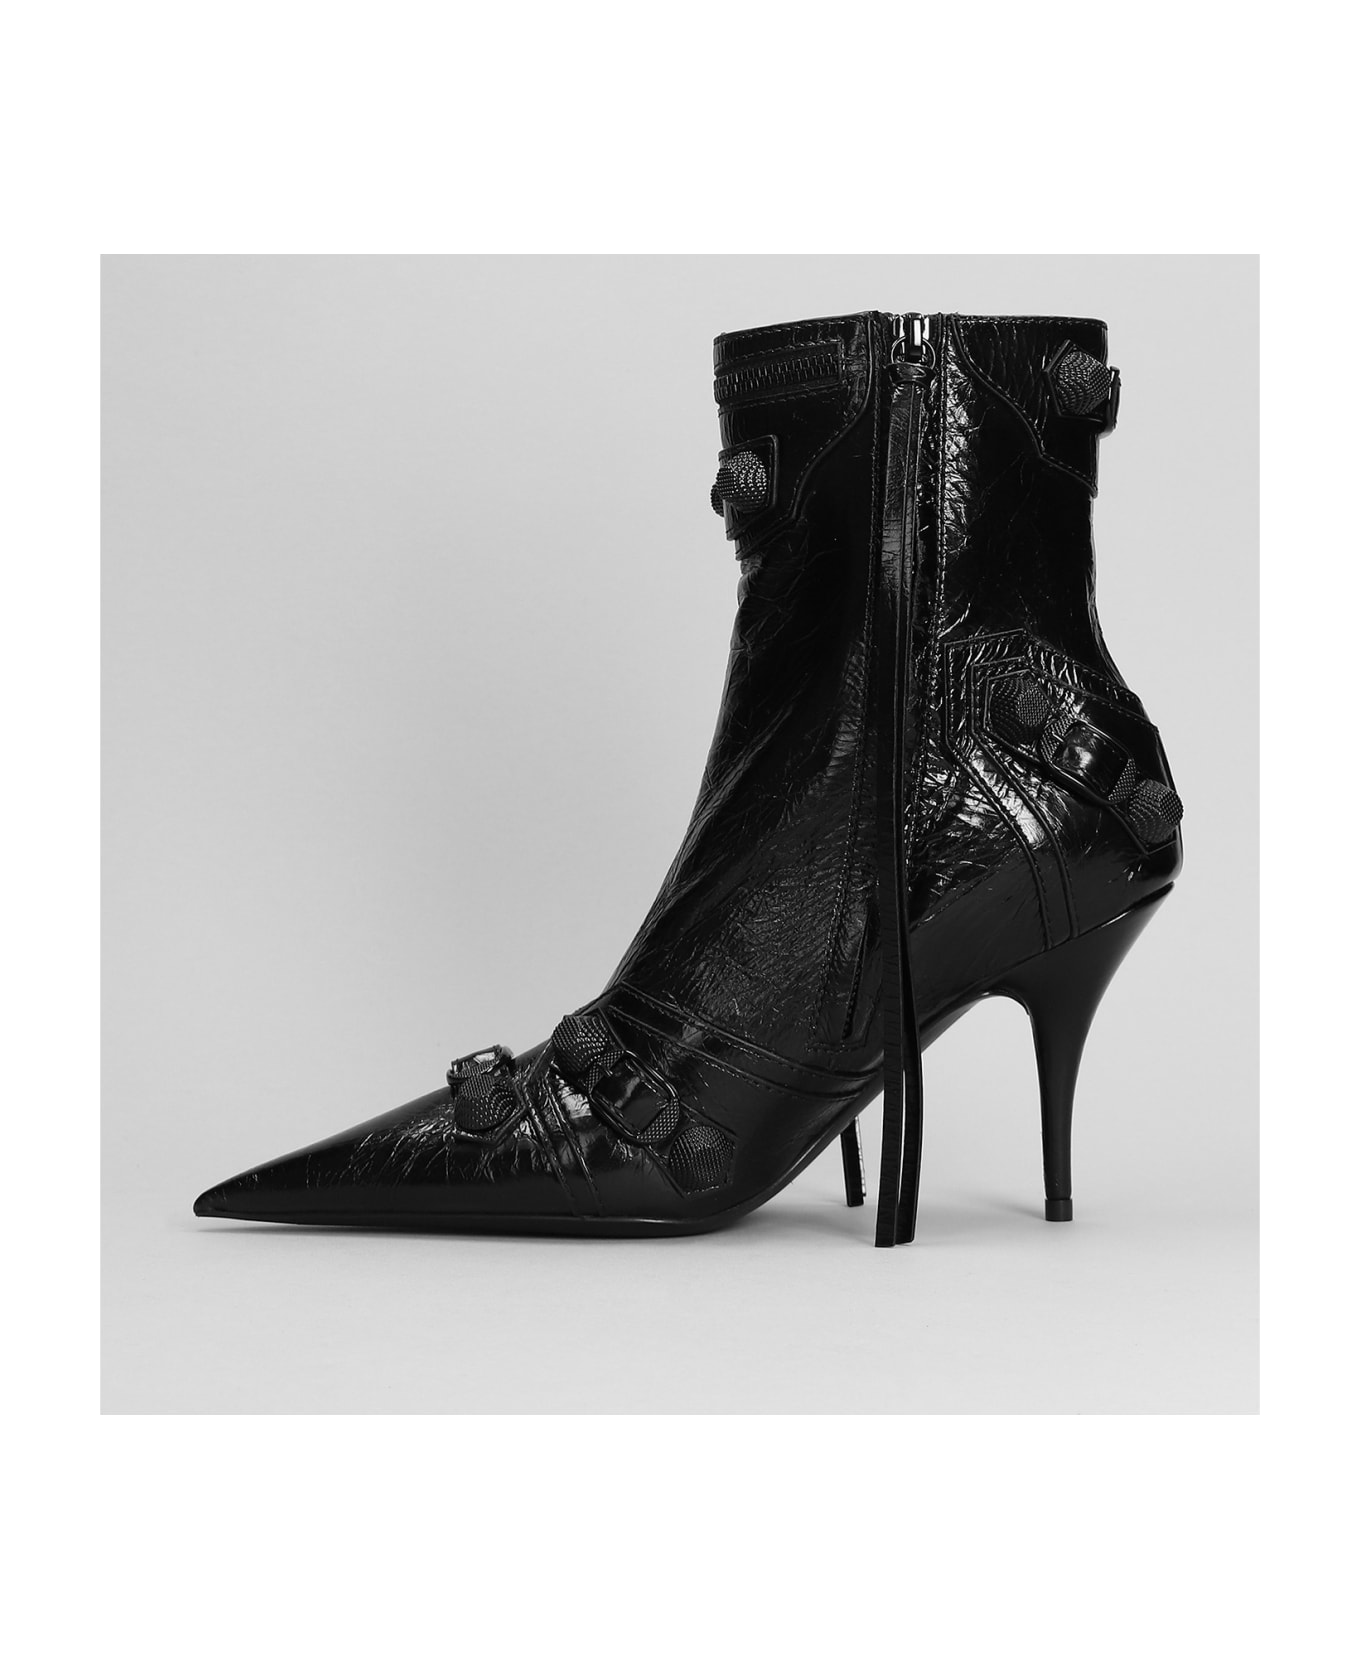 Balenciaga Cagole Bootie High Heels Ankle Boots In Black Leather - black